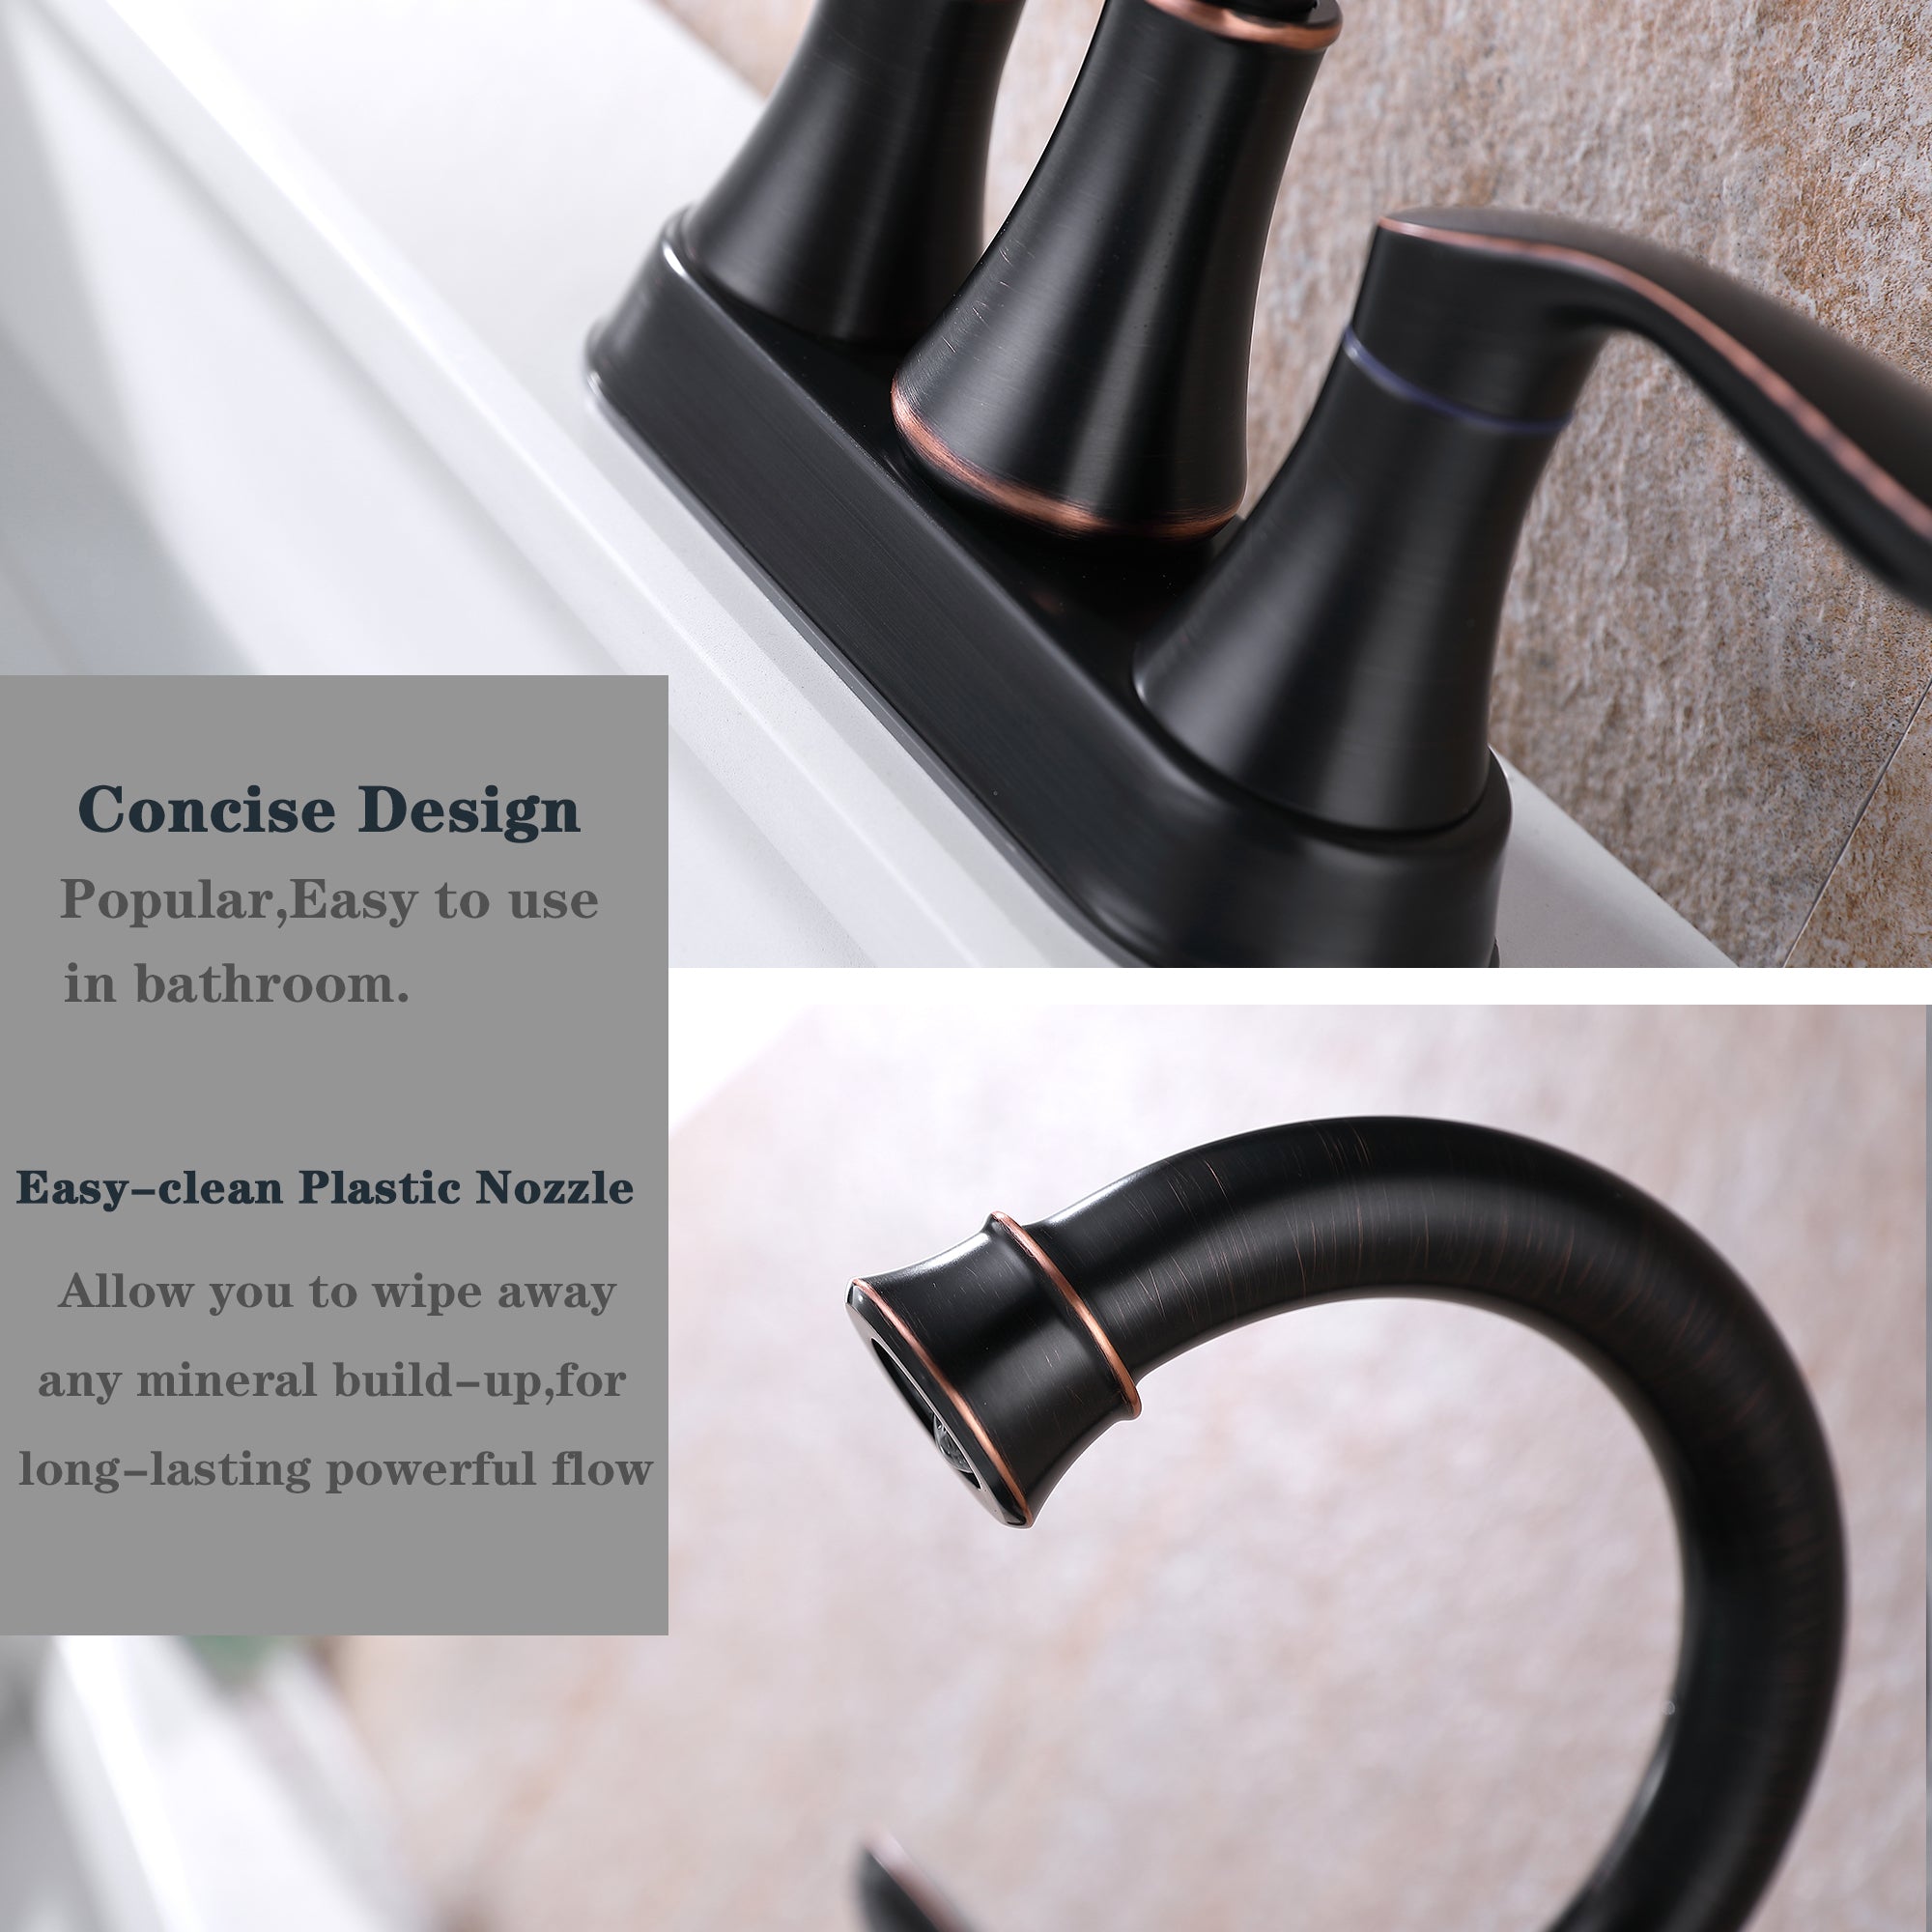 2 Handle 4 Inch Oil Rubbed Bronze Bathroom Faucet oil-rubbed bronze-stainless steel